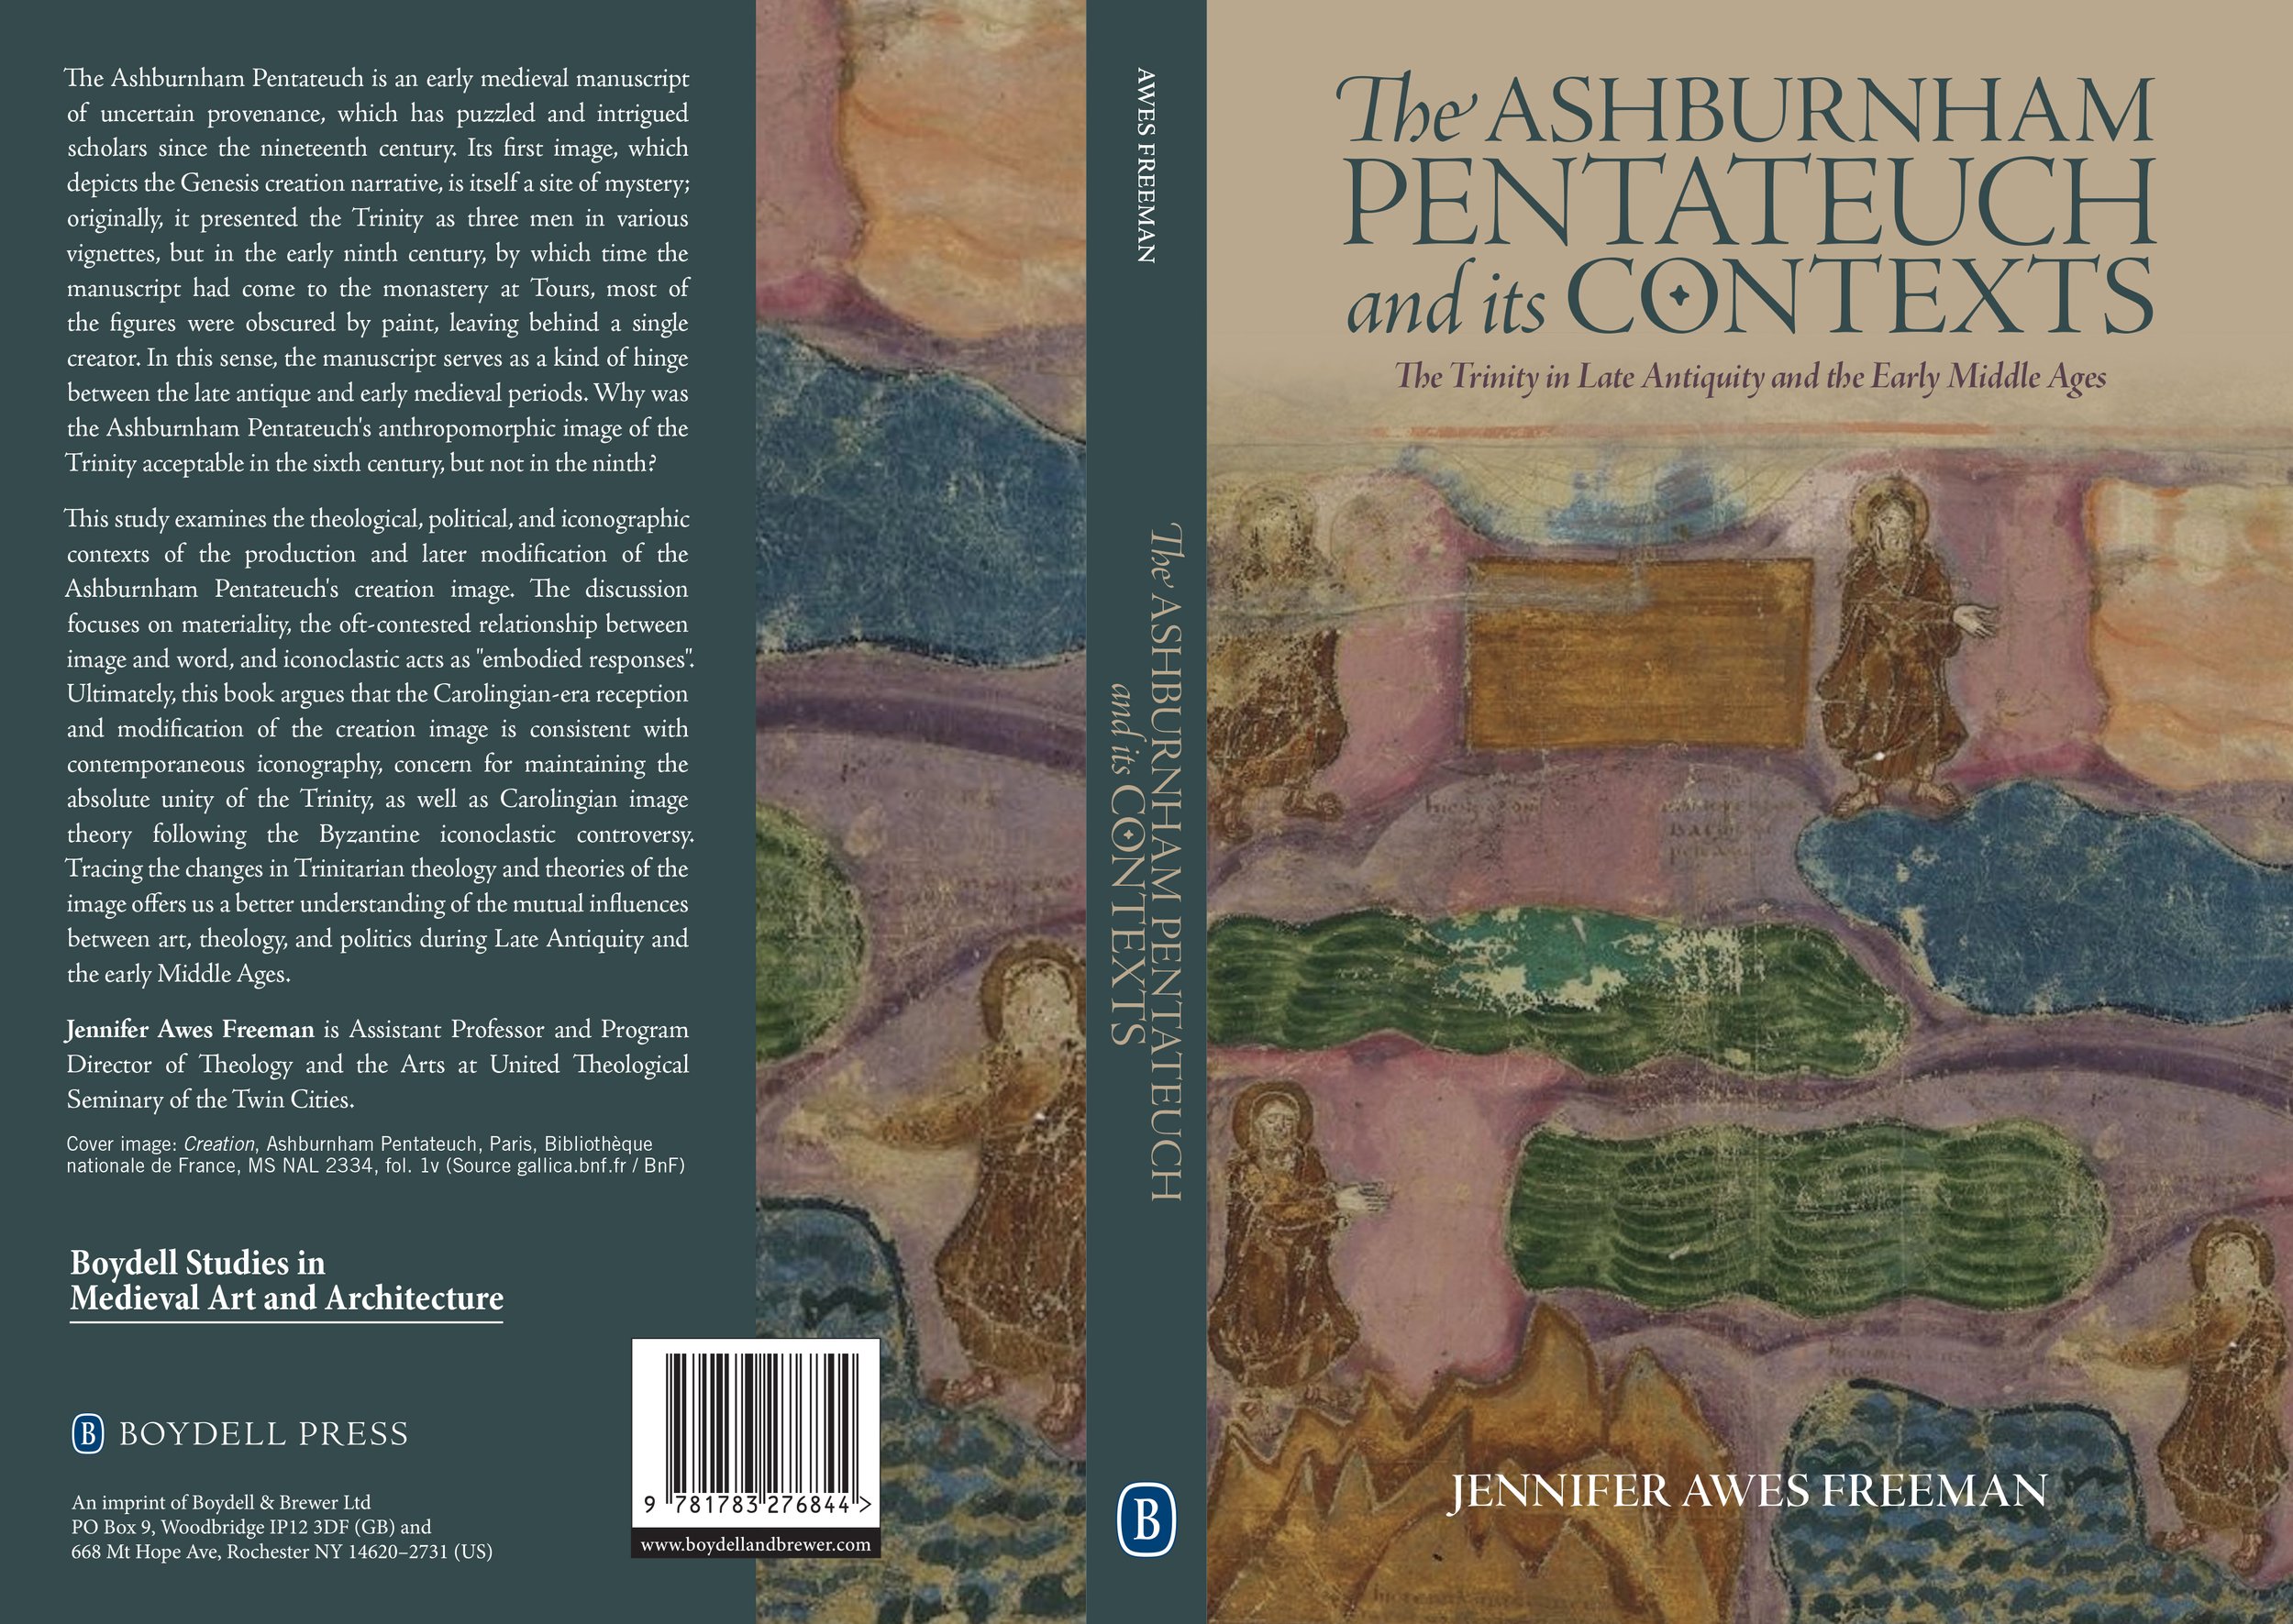 The Ashburnham Pentateuch and its Contents